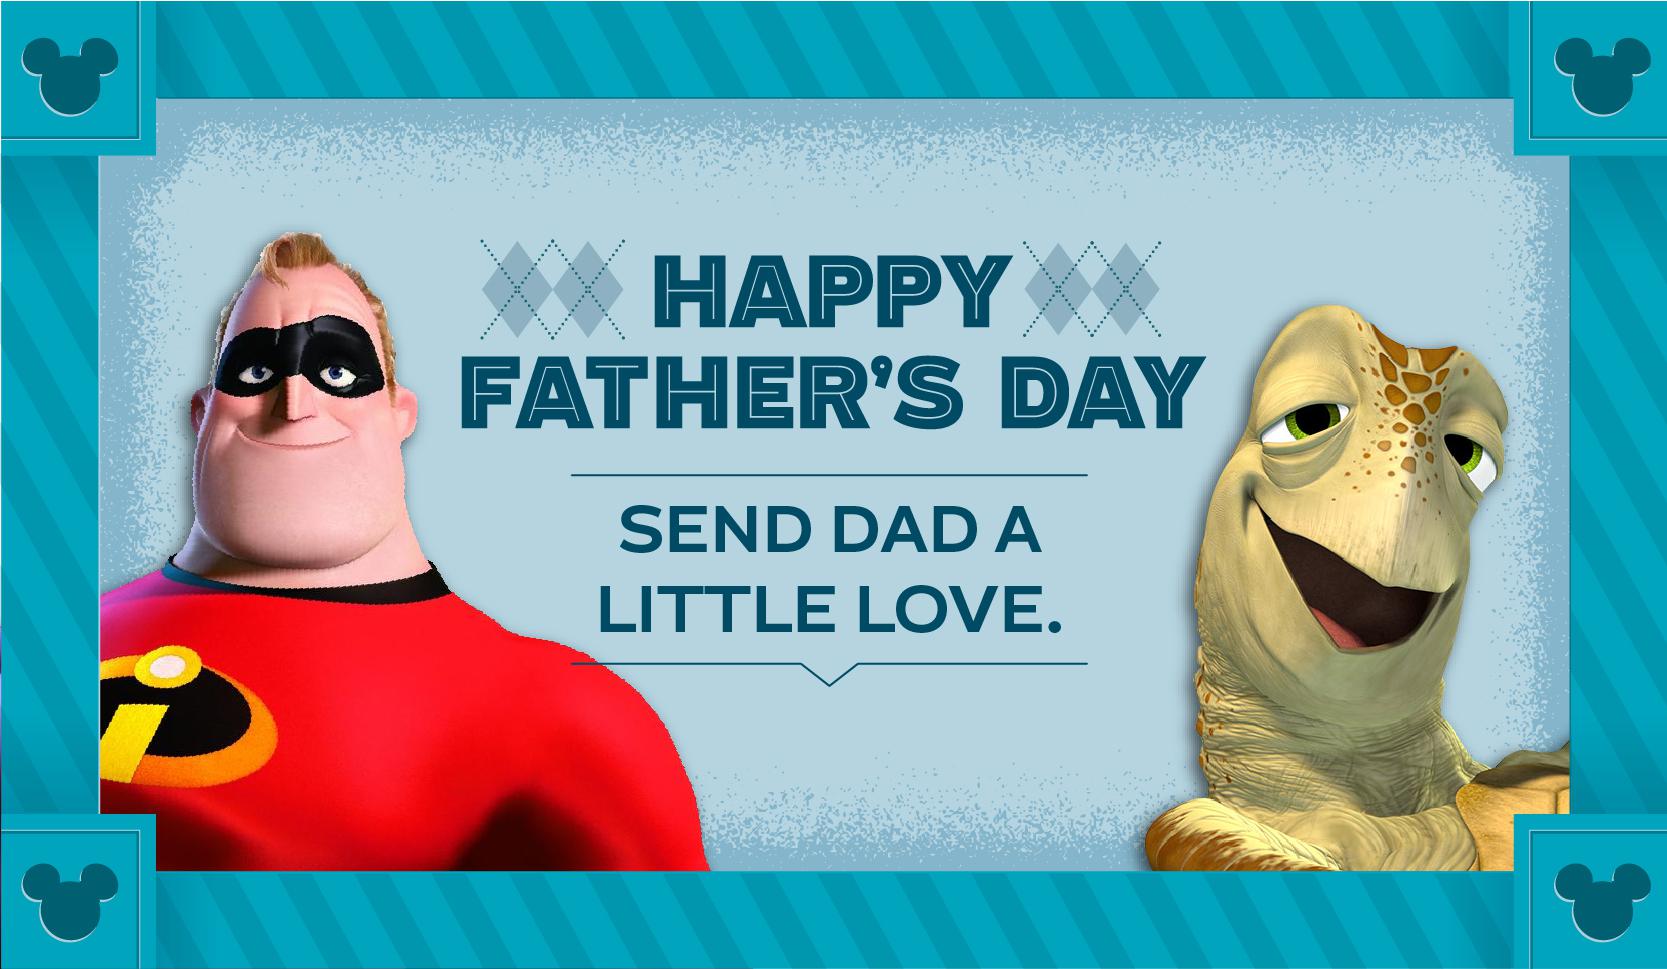 father-s-day-cards-feat-disney-pixar-dads-disney-credit-cards